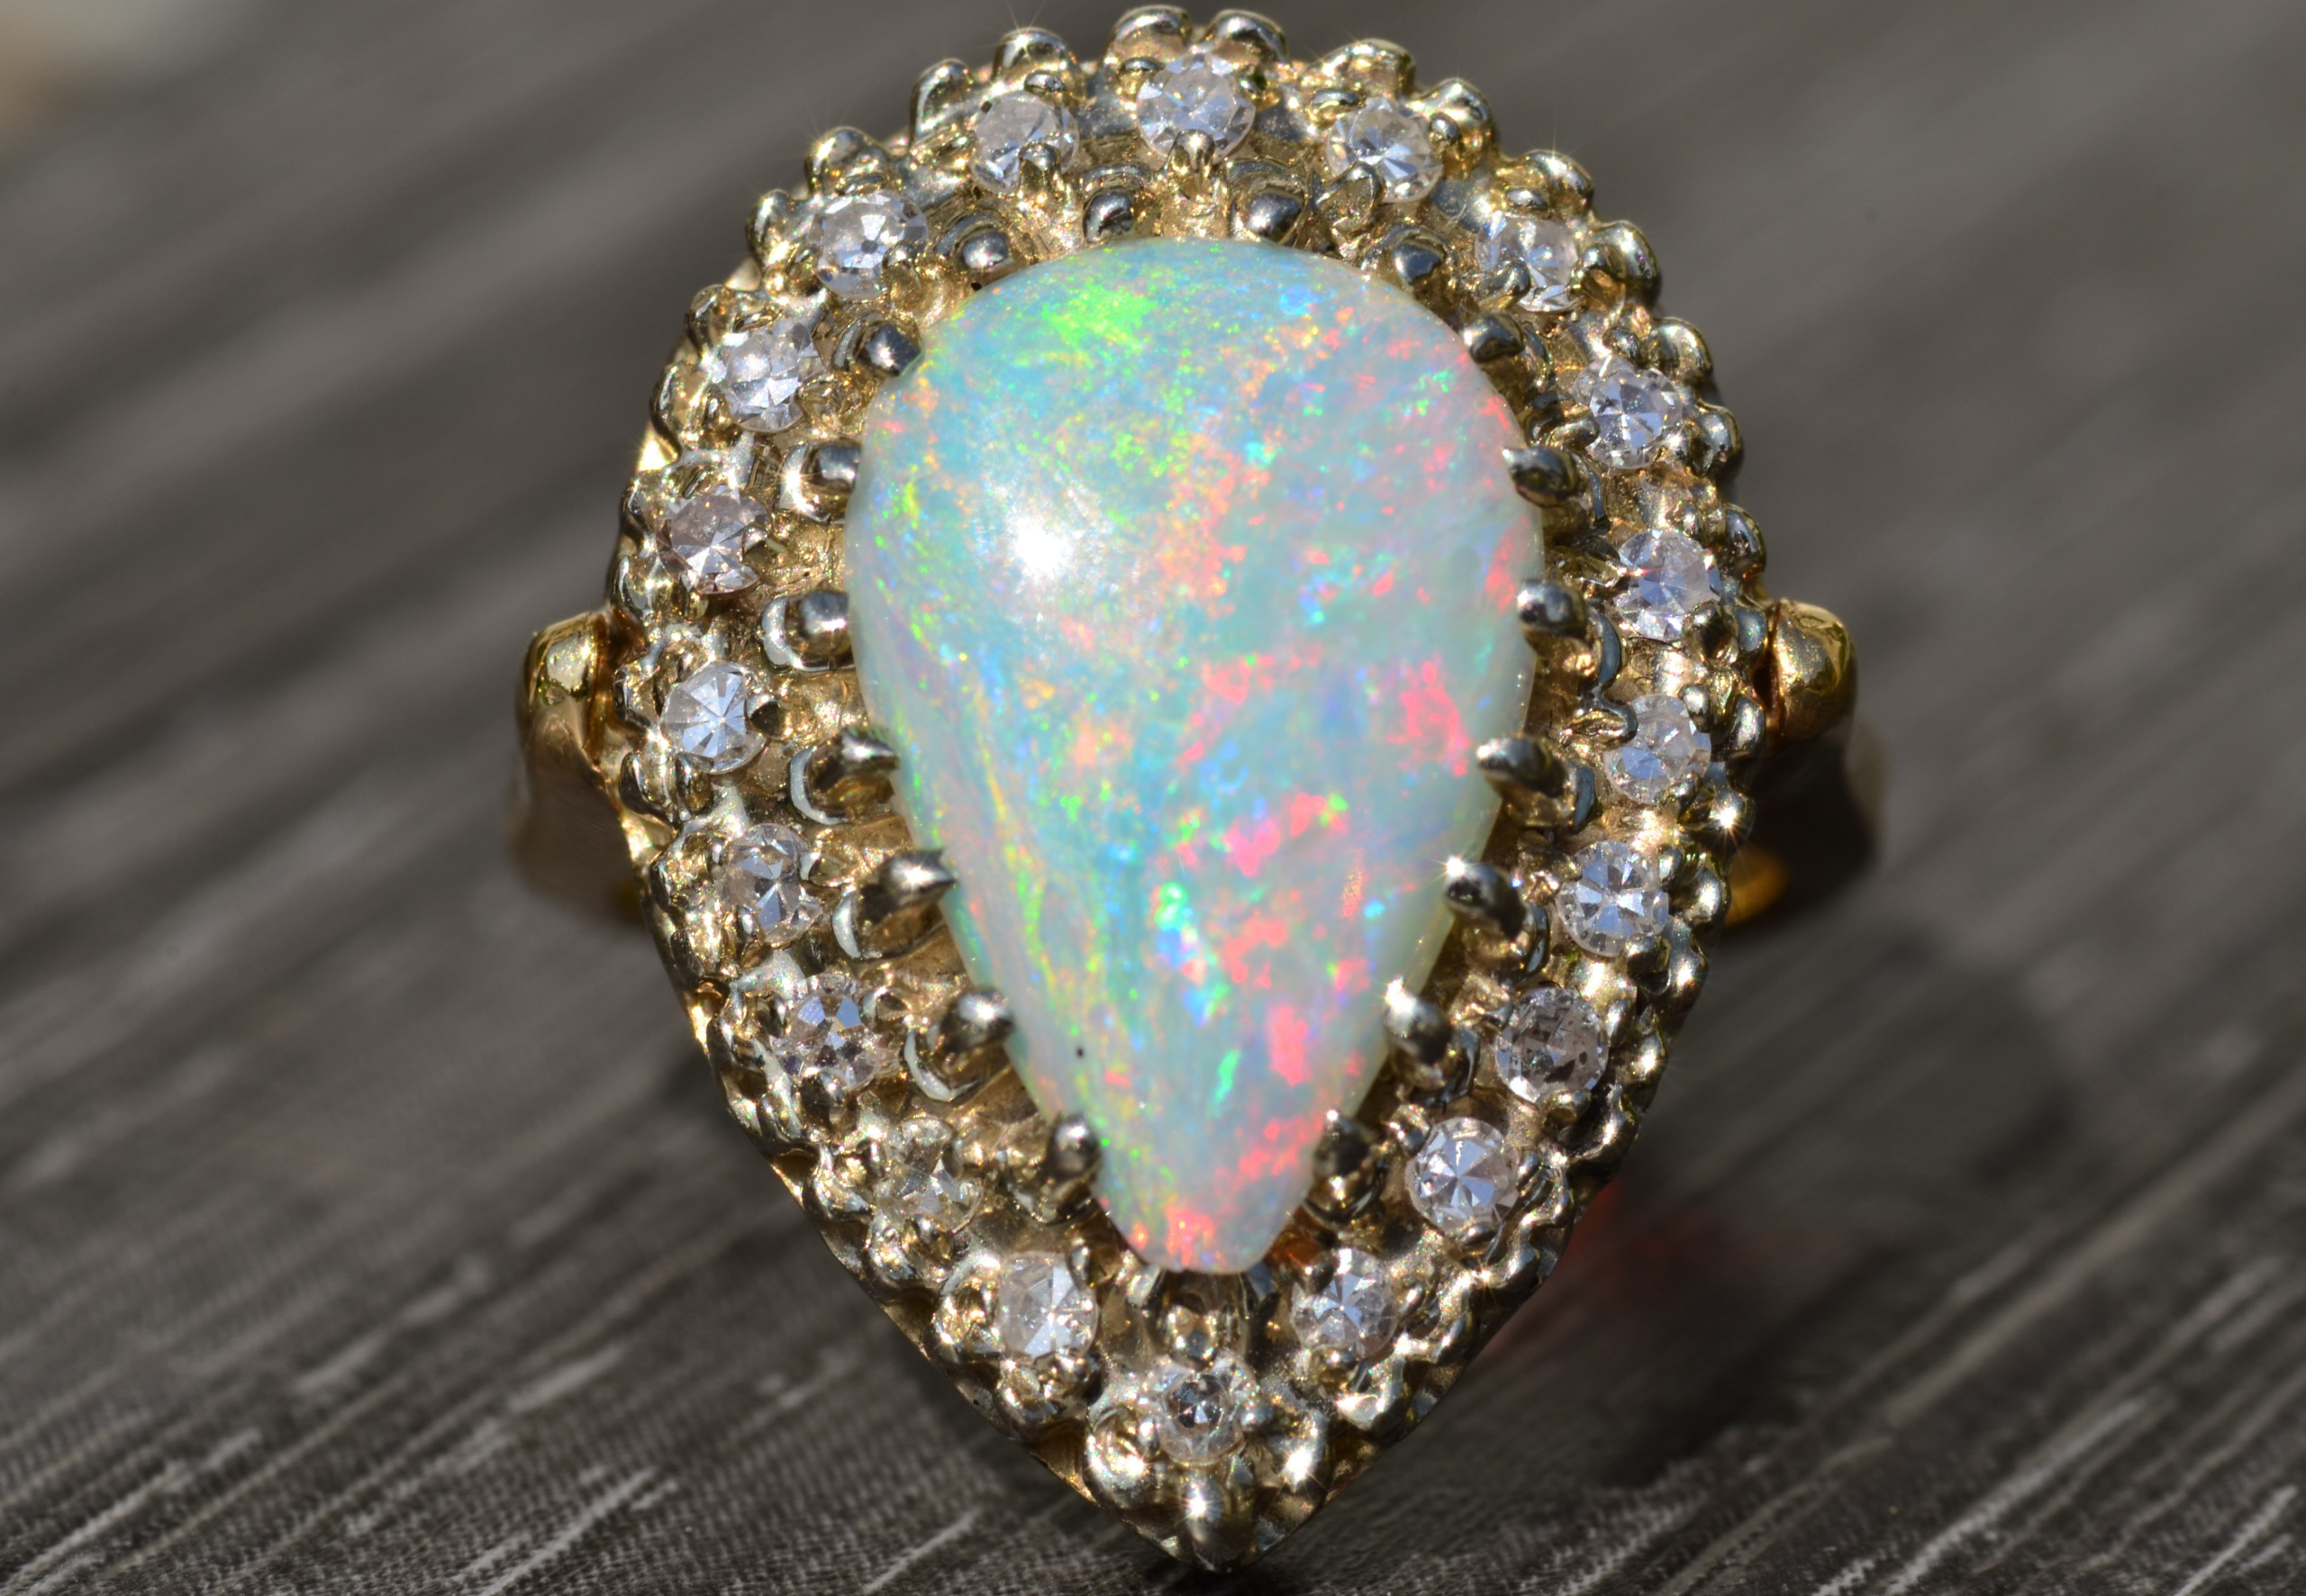 SOLD - The Hatfield: Outstanding Pear Shaped Australian Opal and ...